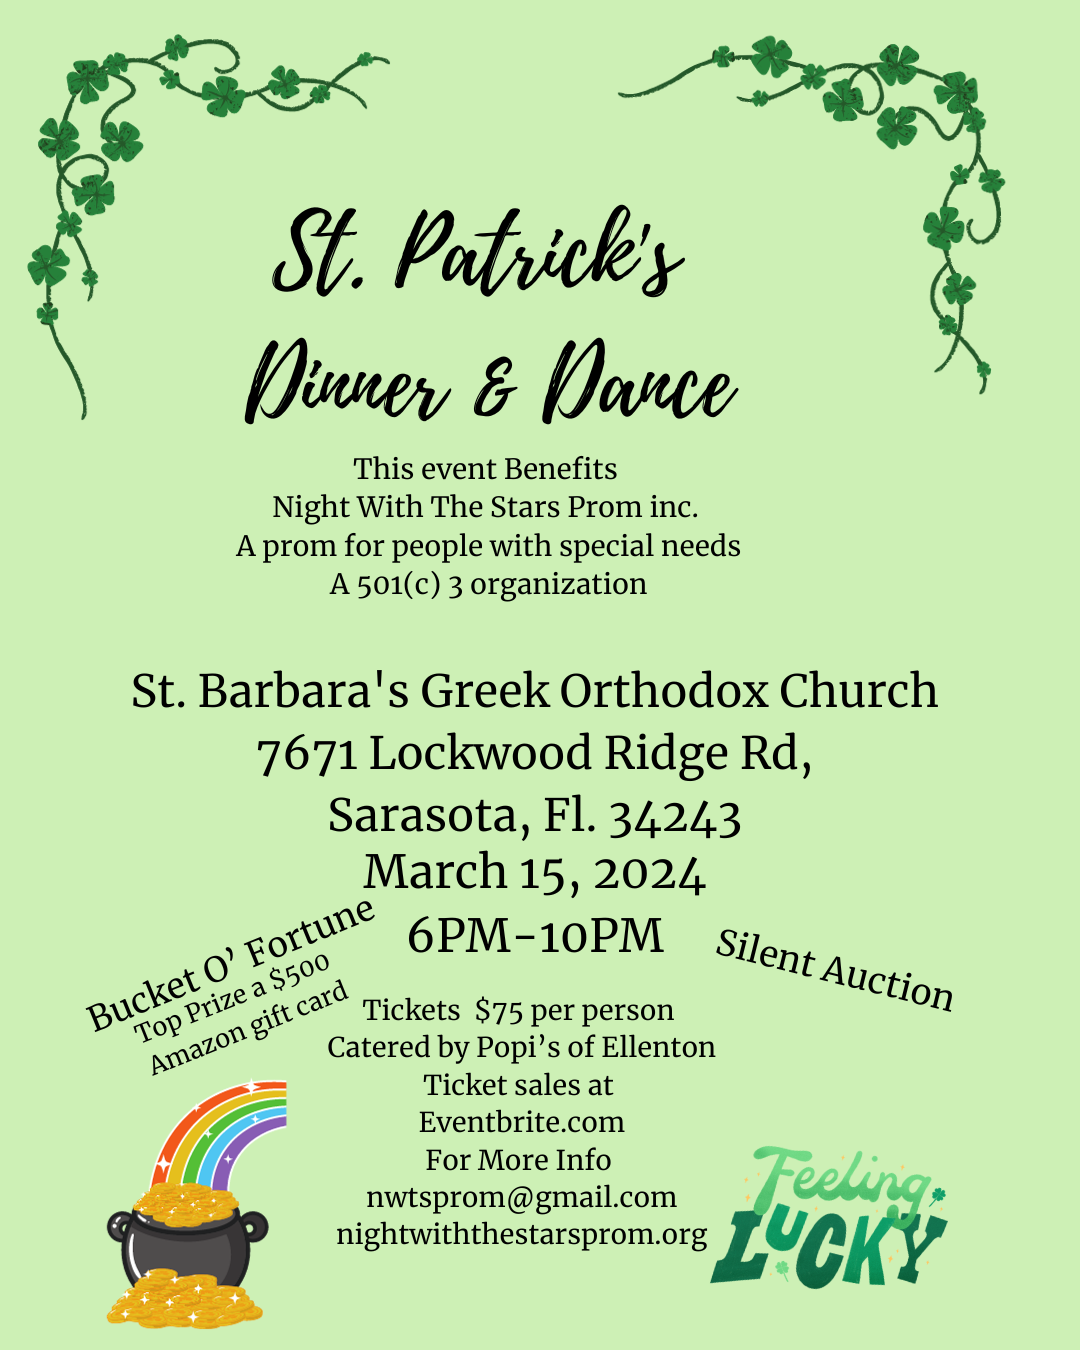 Make This St. Paddy's Day the Luckiest! at Ellenton Premium